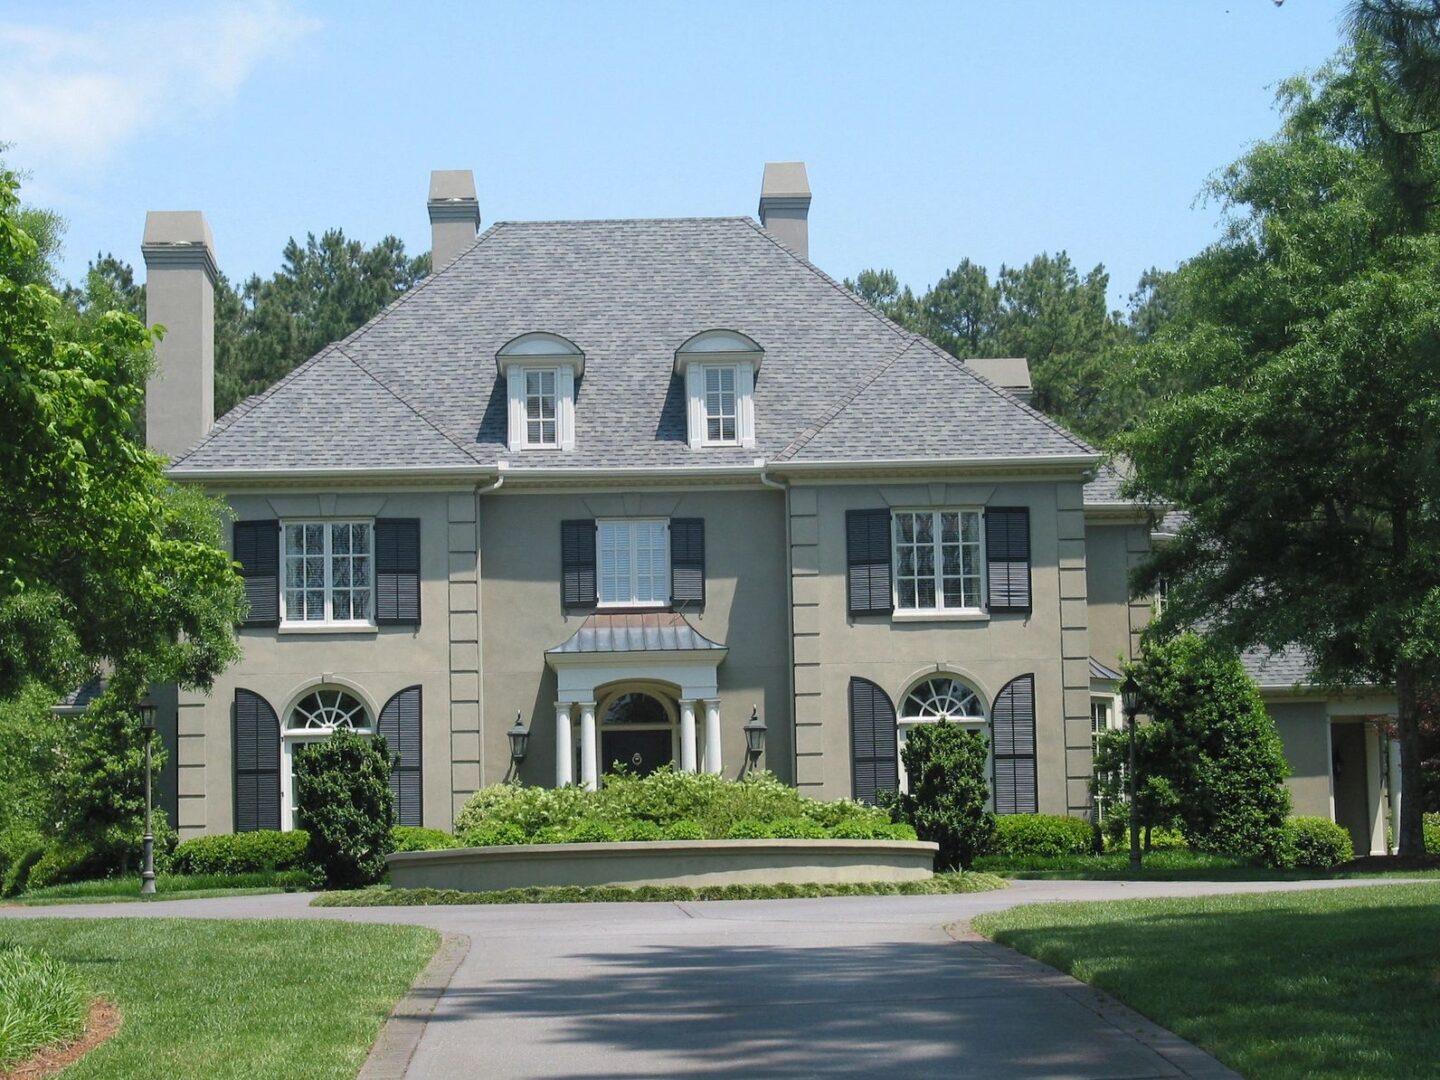 A large house with a driveway in front of it.